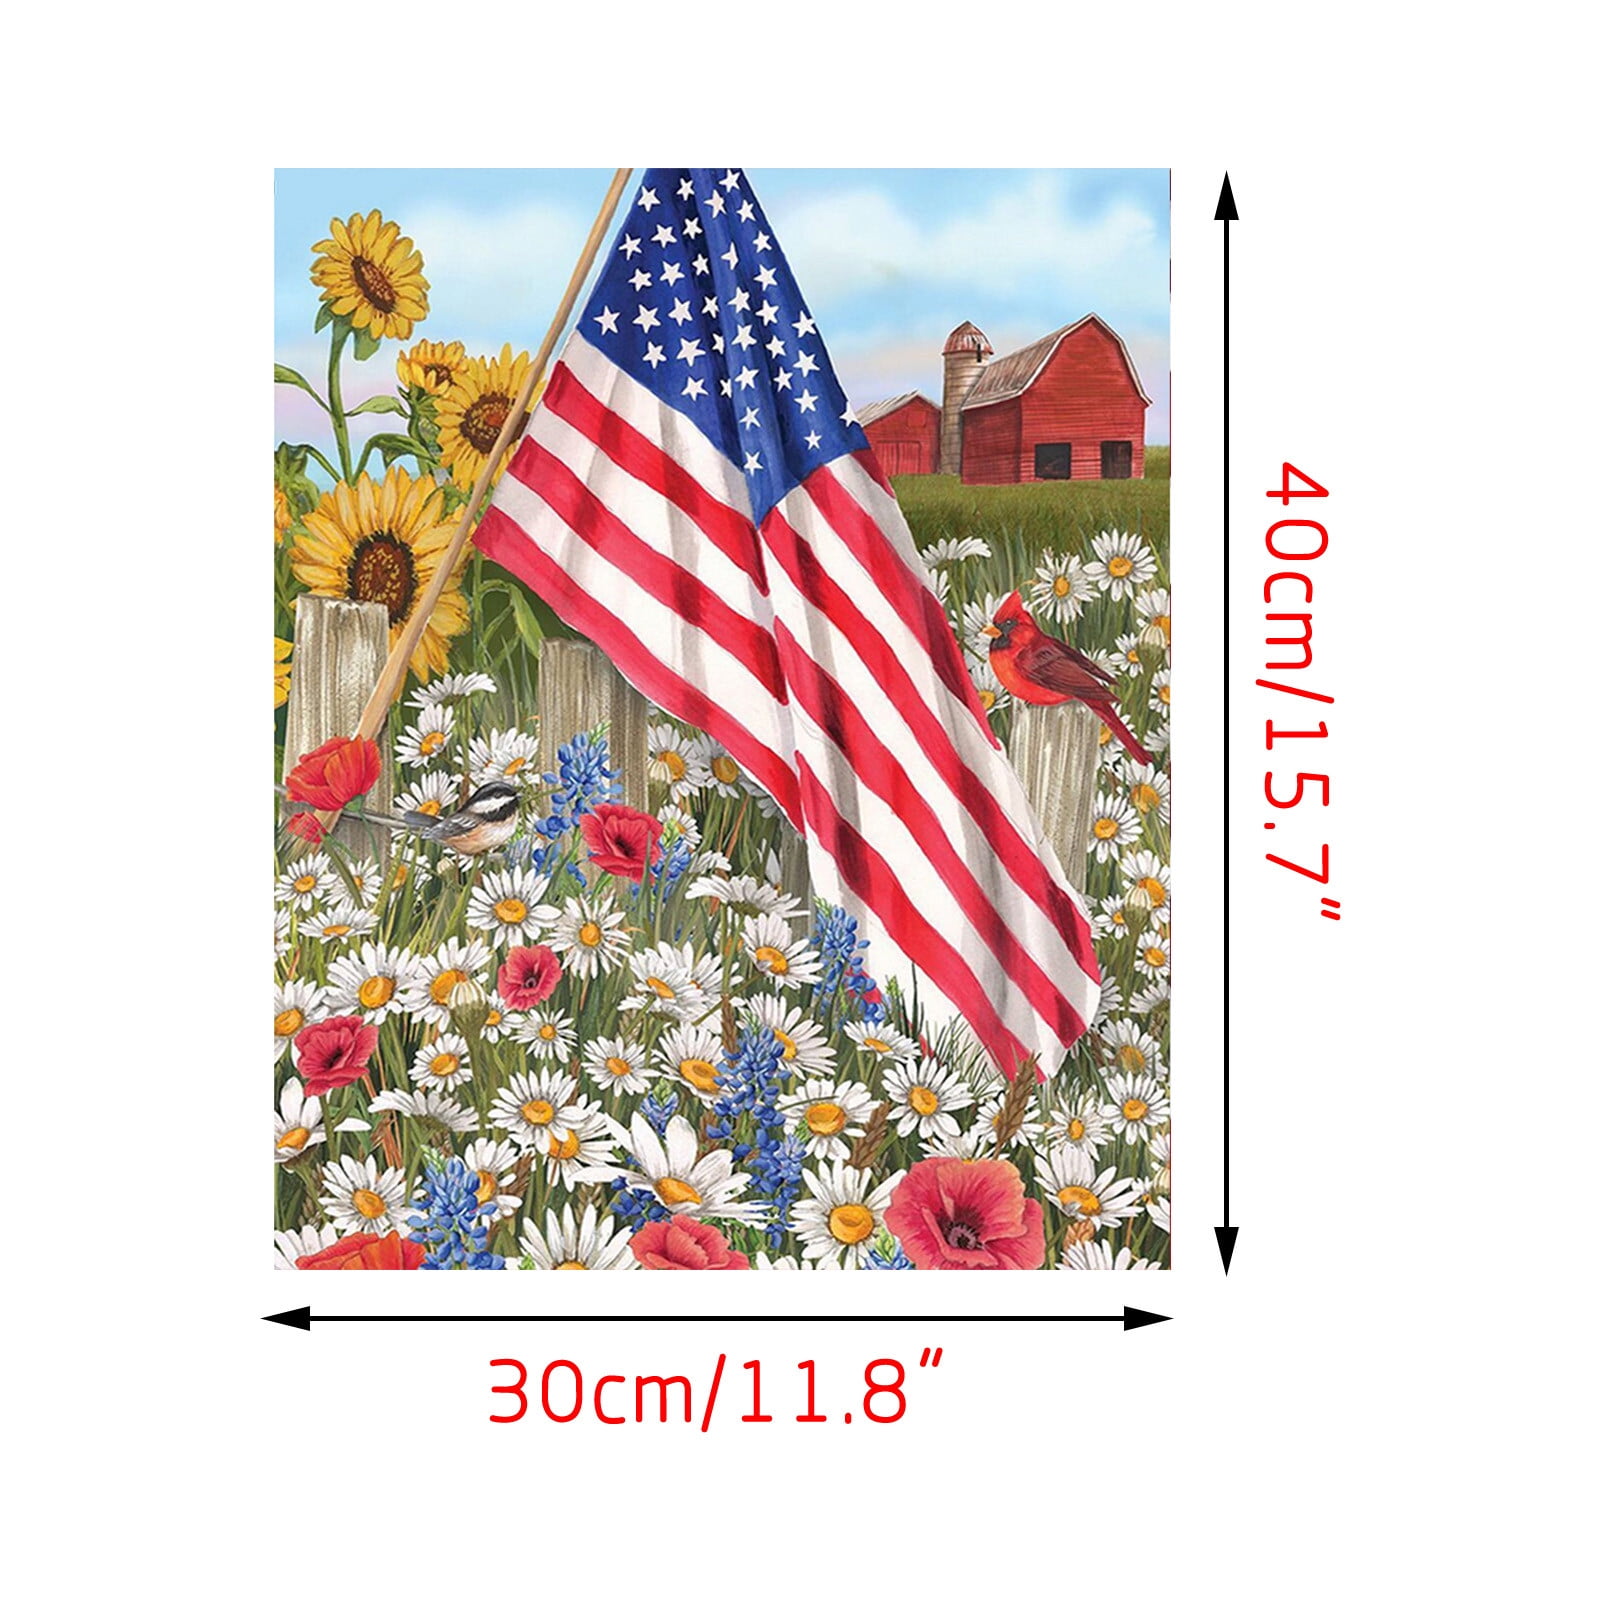 Cross Stitch Crystal Rhinestone Embroidery Pictures Arts Craft for Home Wall Decor Gift DIY 5D Diamond Painting America Flag by Number Kits Full Drills Amrica Flag and Cross 15.7 by 11.8 in 